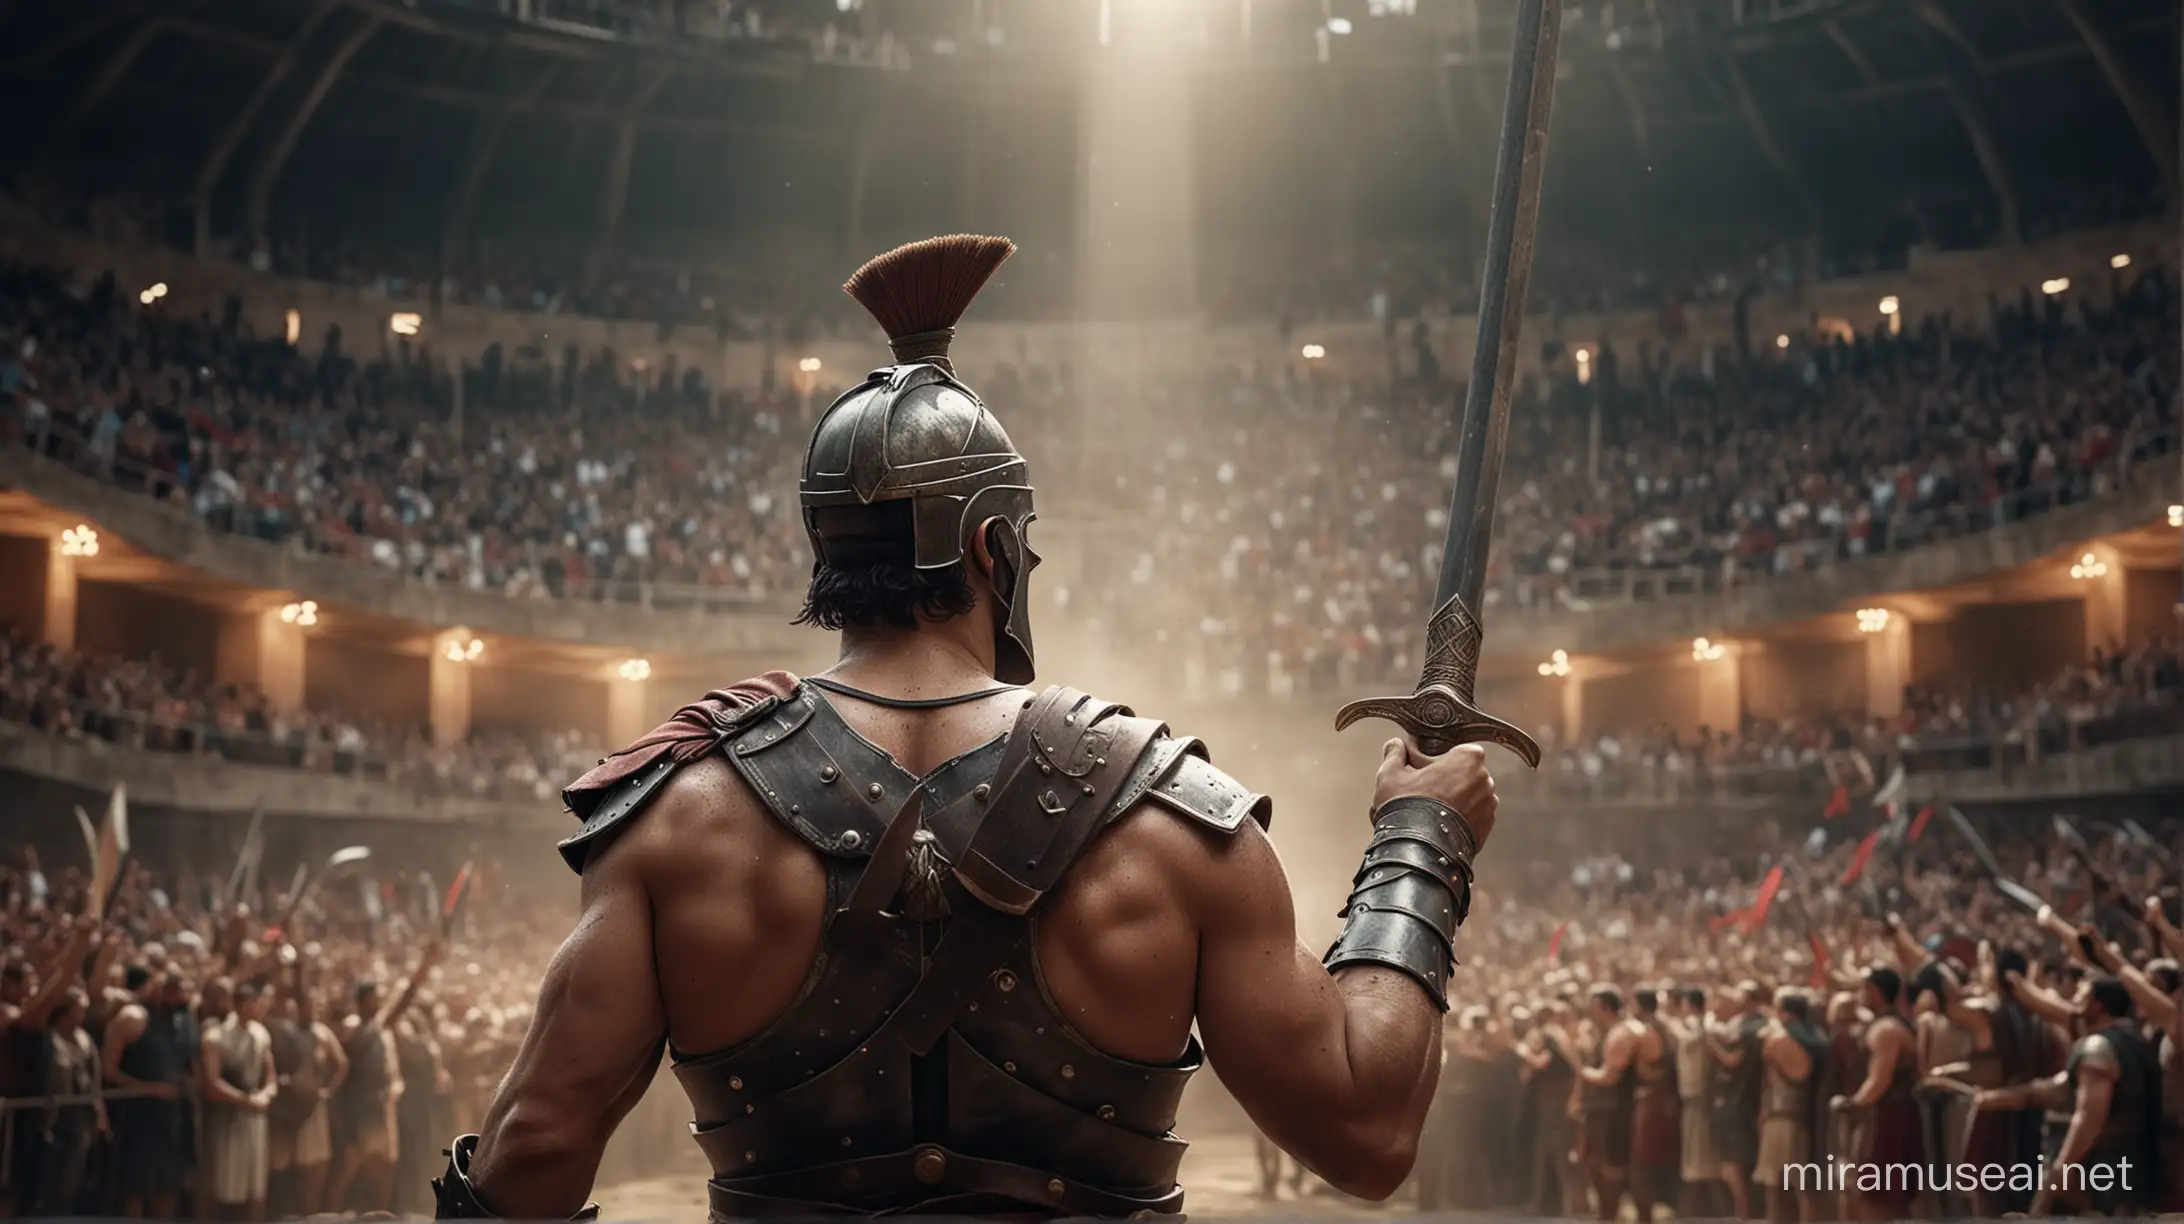 Realistic image. close up view of victorious gladiator from behind, holding up sword in victory. standing in an ancient Roman arena. full of spectators in the stands. Moody lighting. Sense of scale. Hero pose.